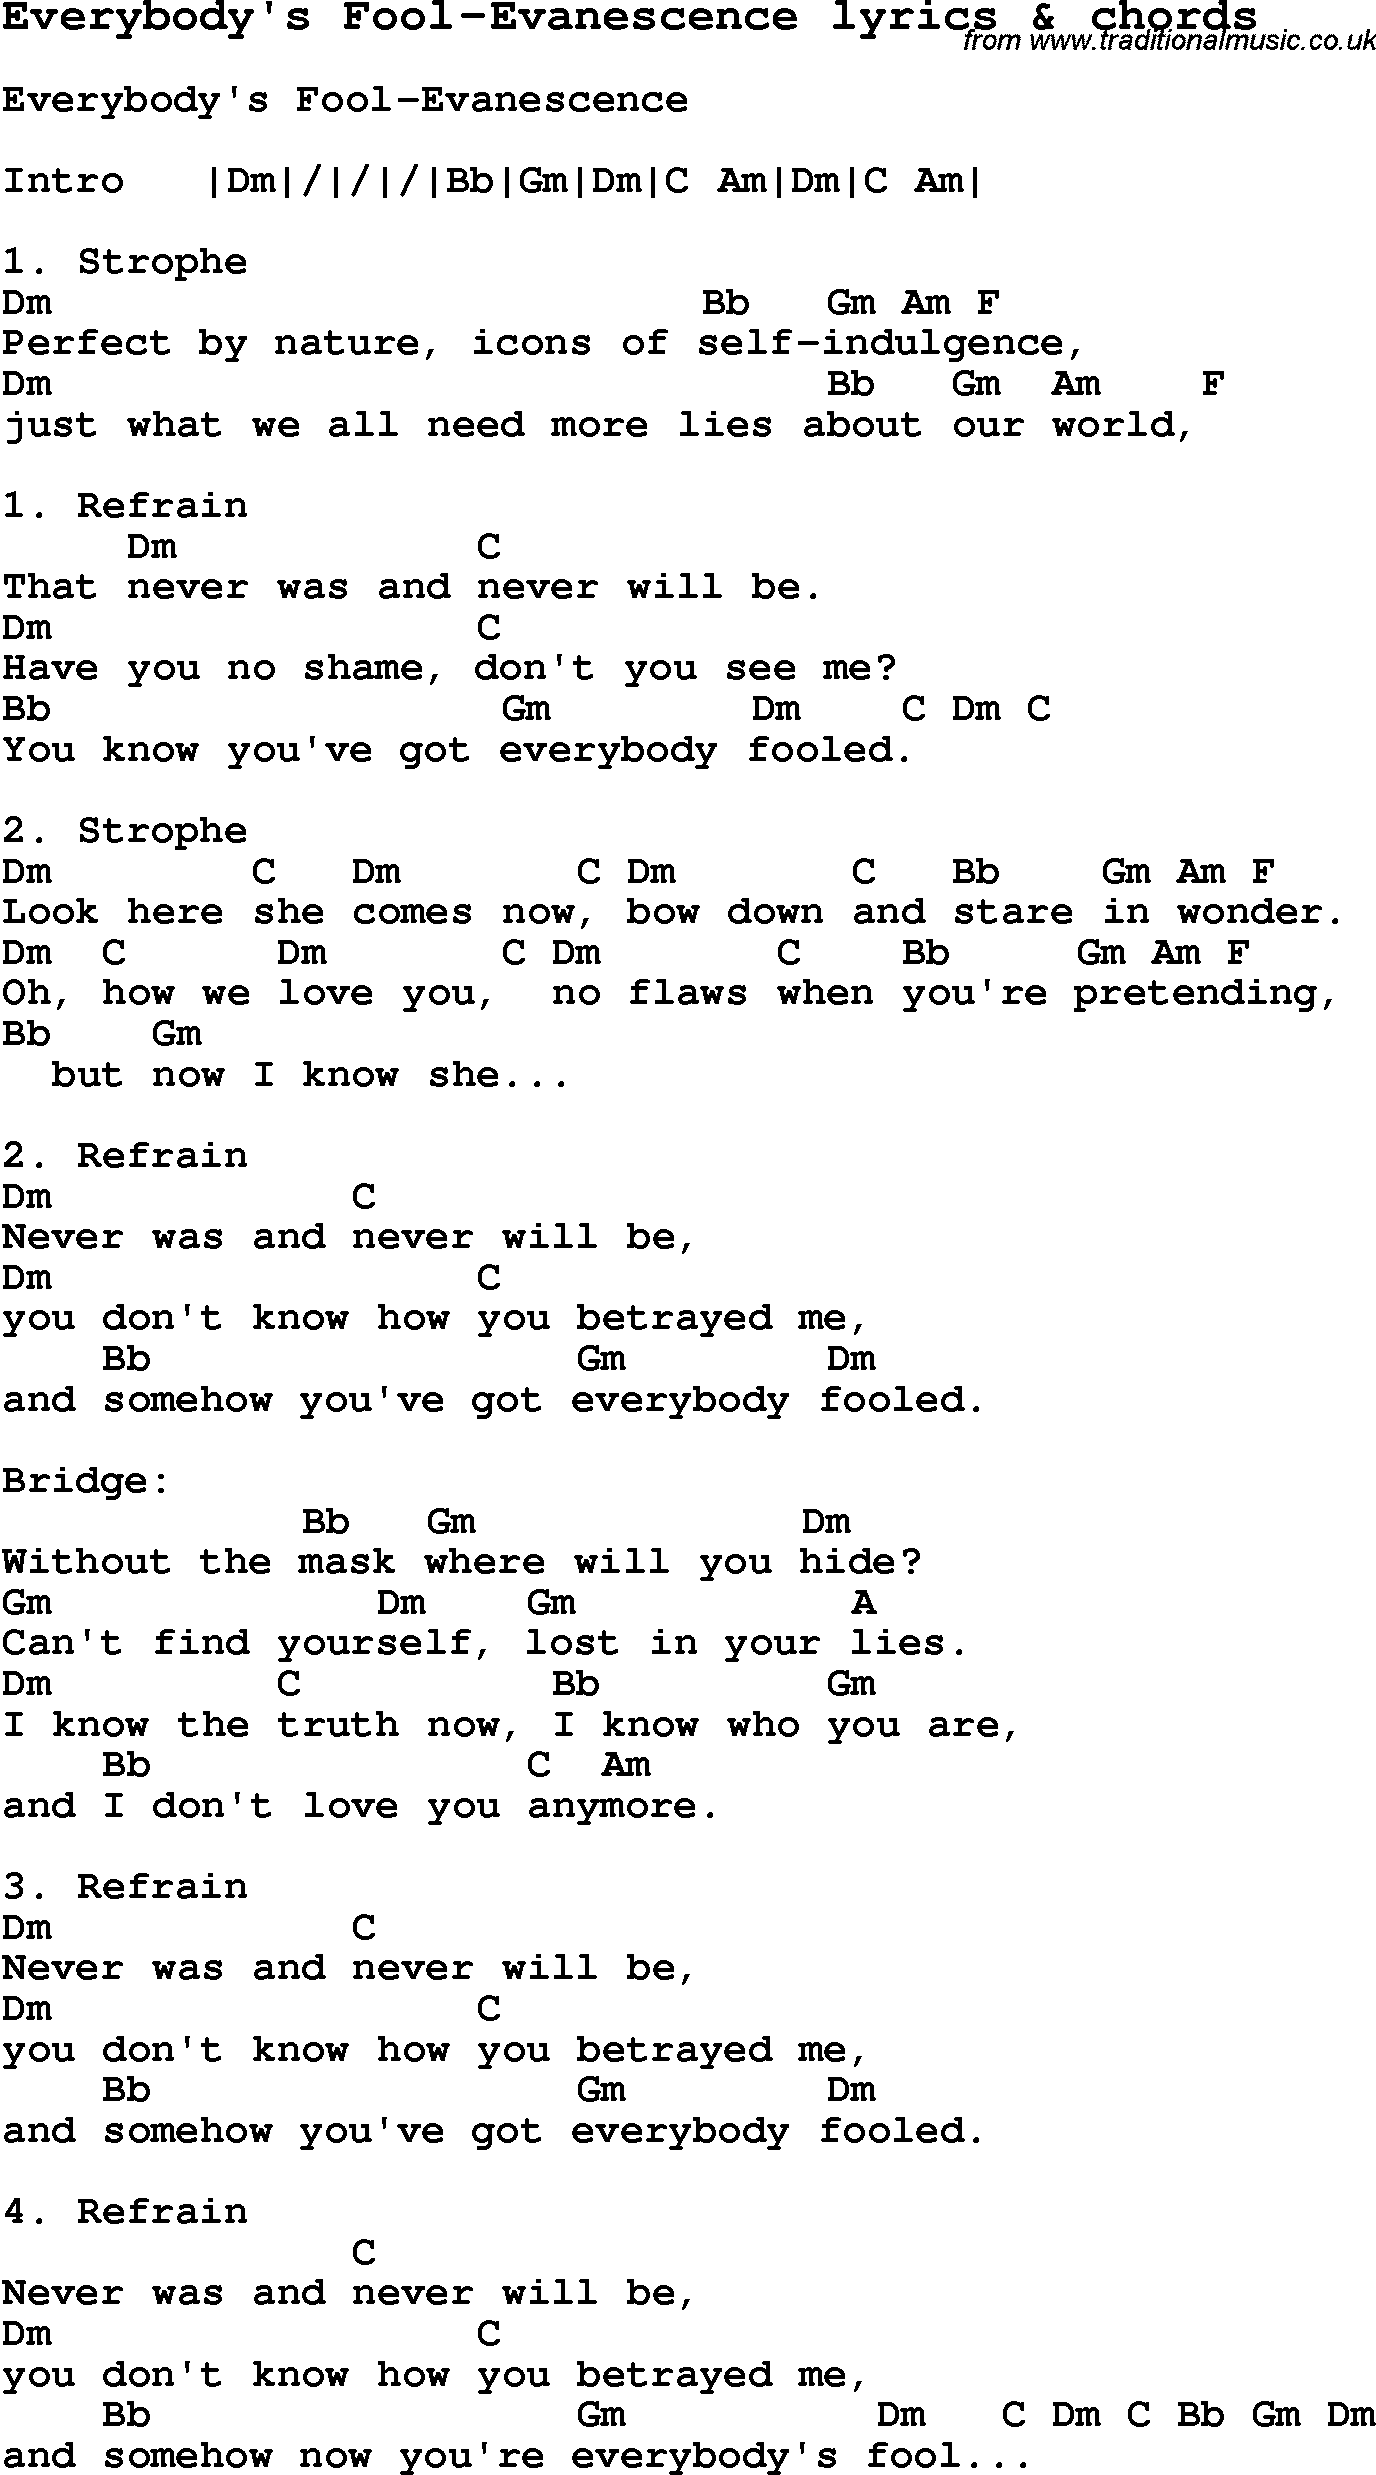 Love Song Lyrics for: Everybody's Fool-Evanescence with chords for Ukulele, Guitar Banjo etc.